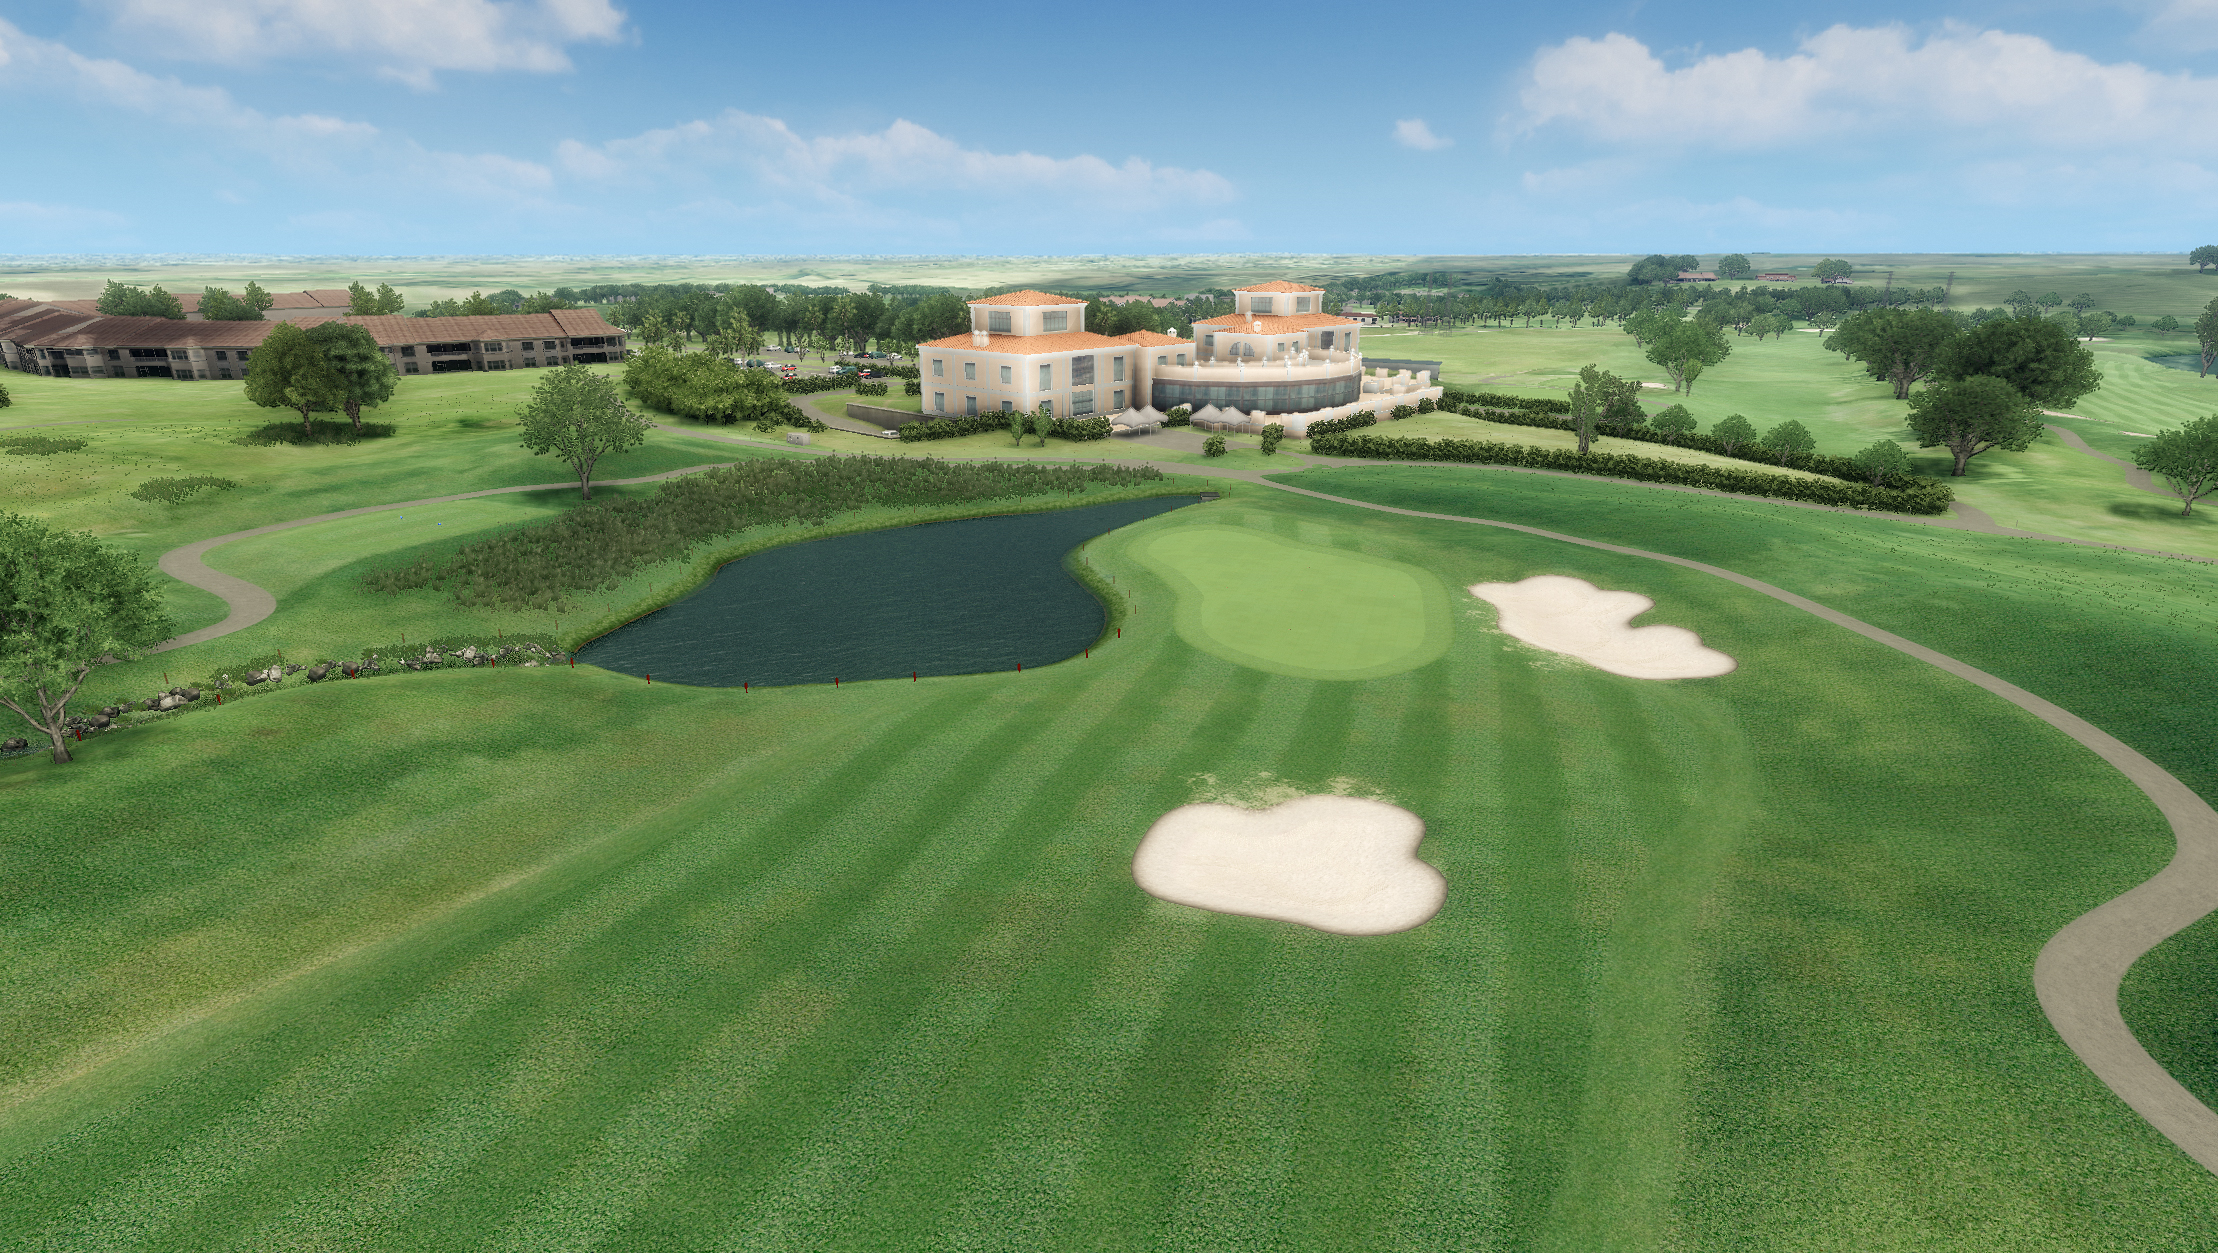 Marco Simone in Italy, Ryder Cup Venue